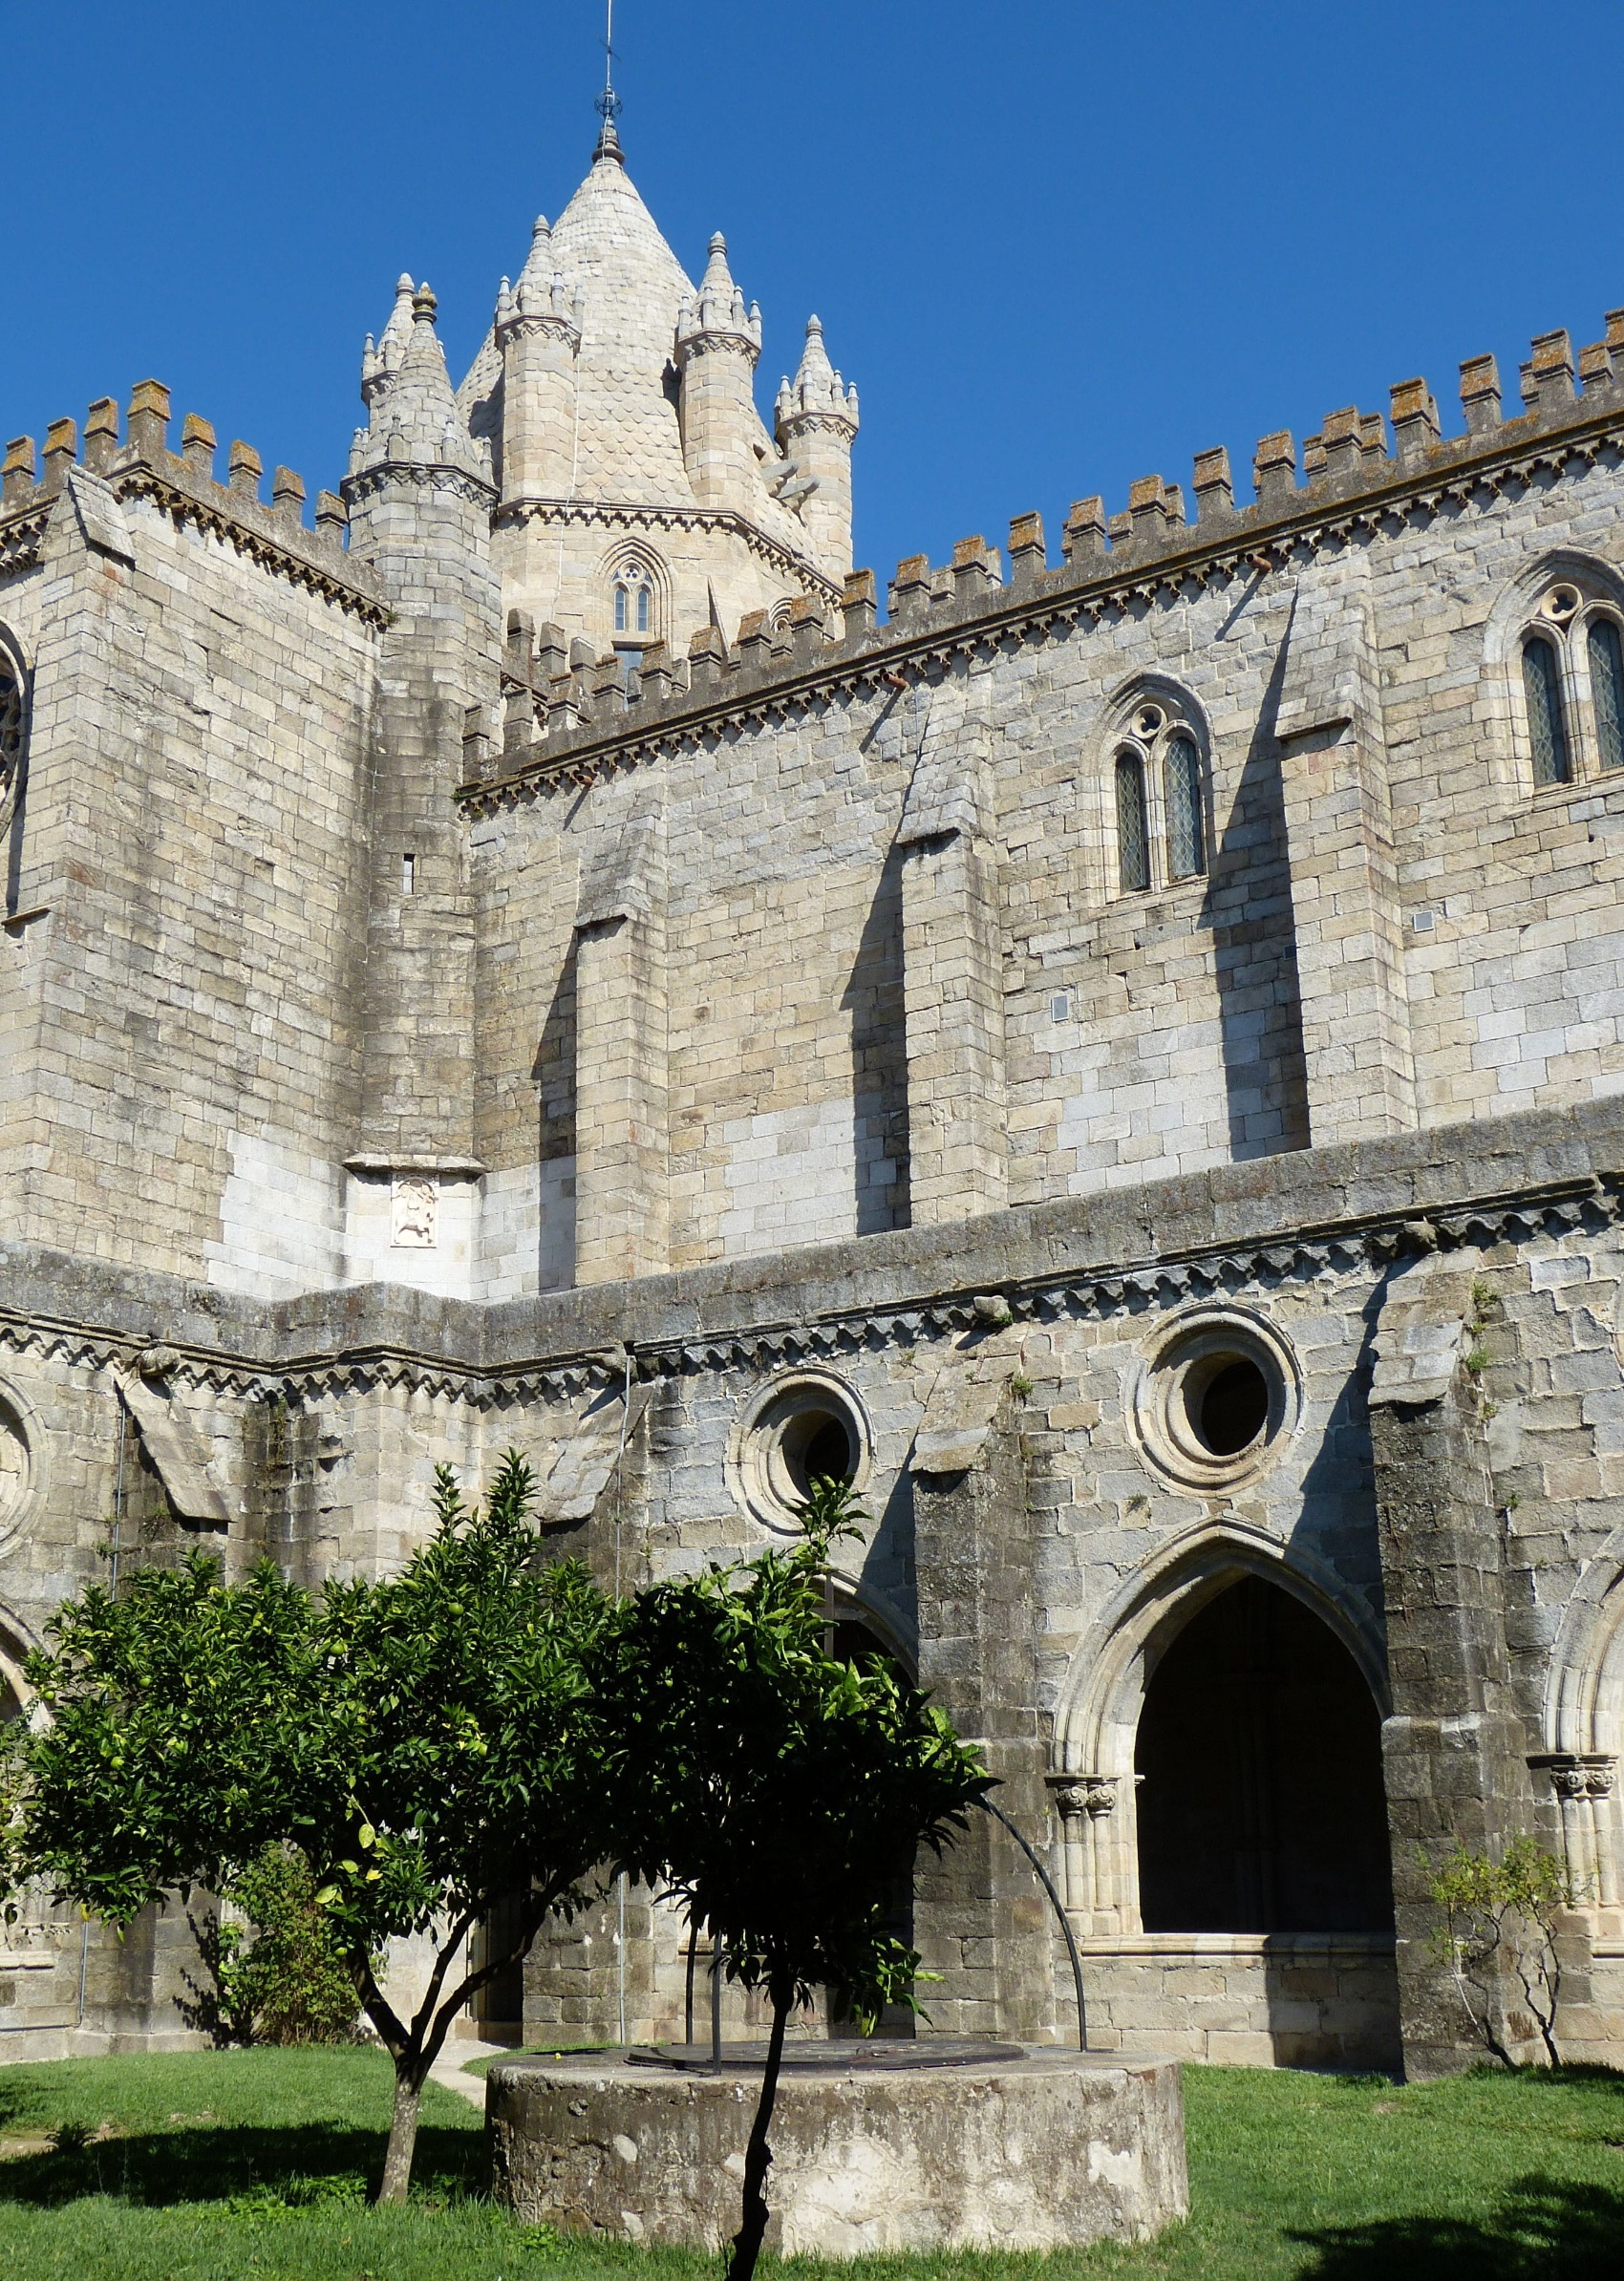 Lisbon-&-Surroundings-with-Alentejo-World-Heritage-cathedral